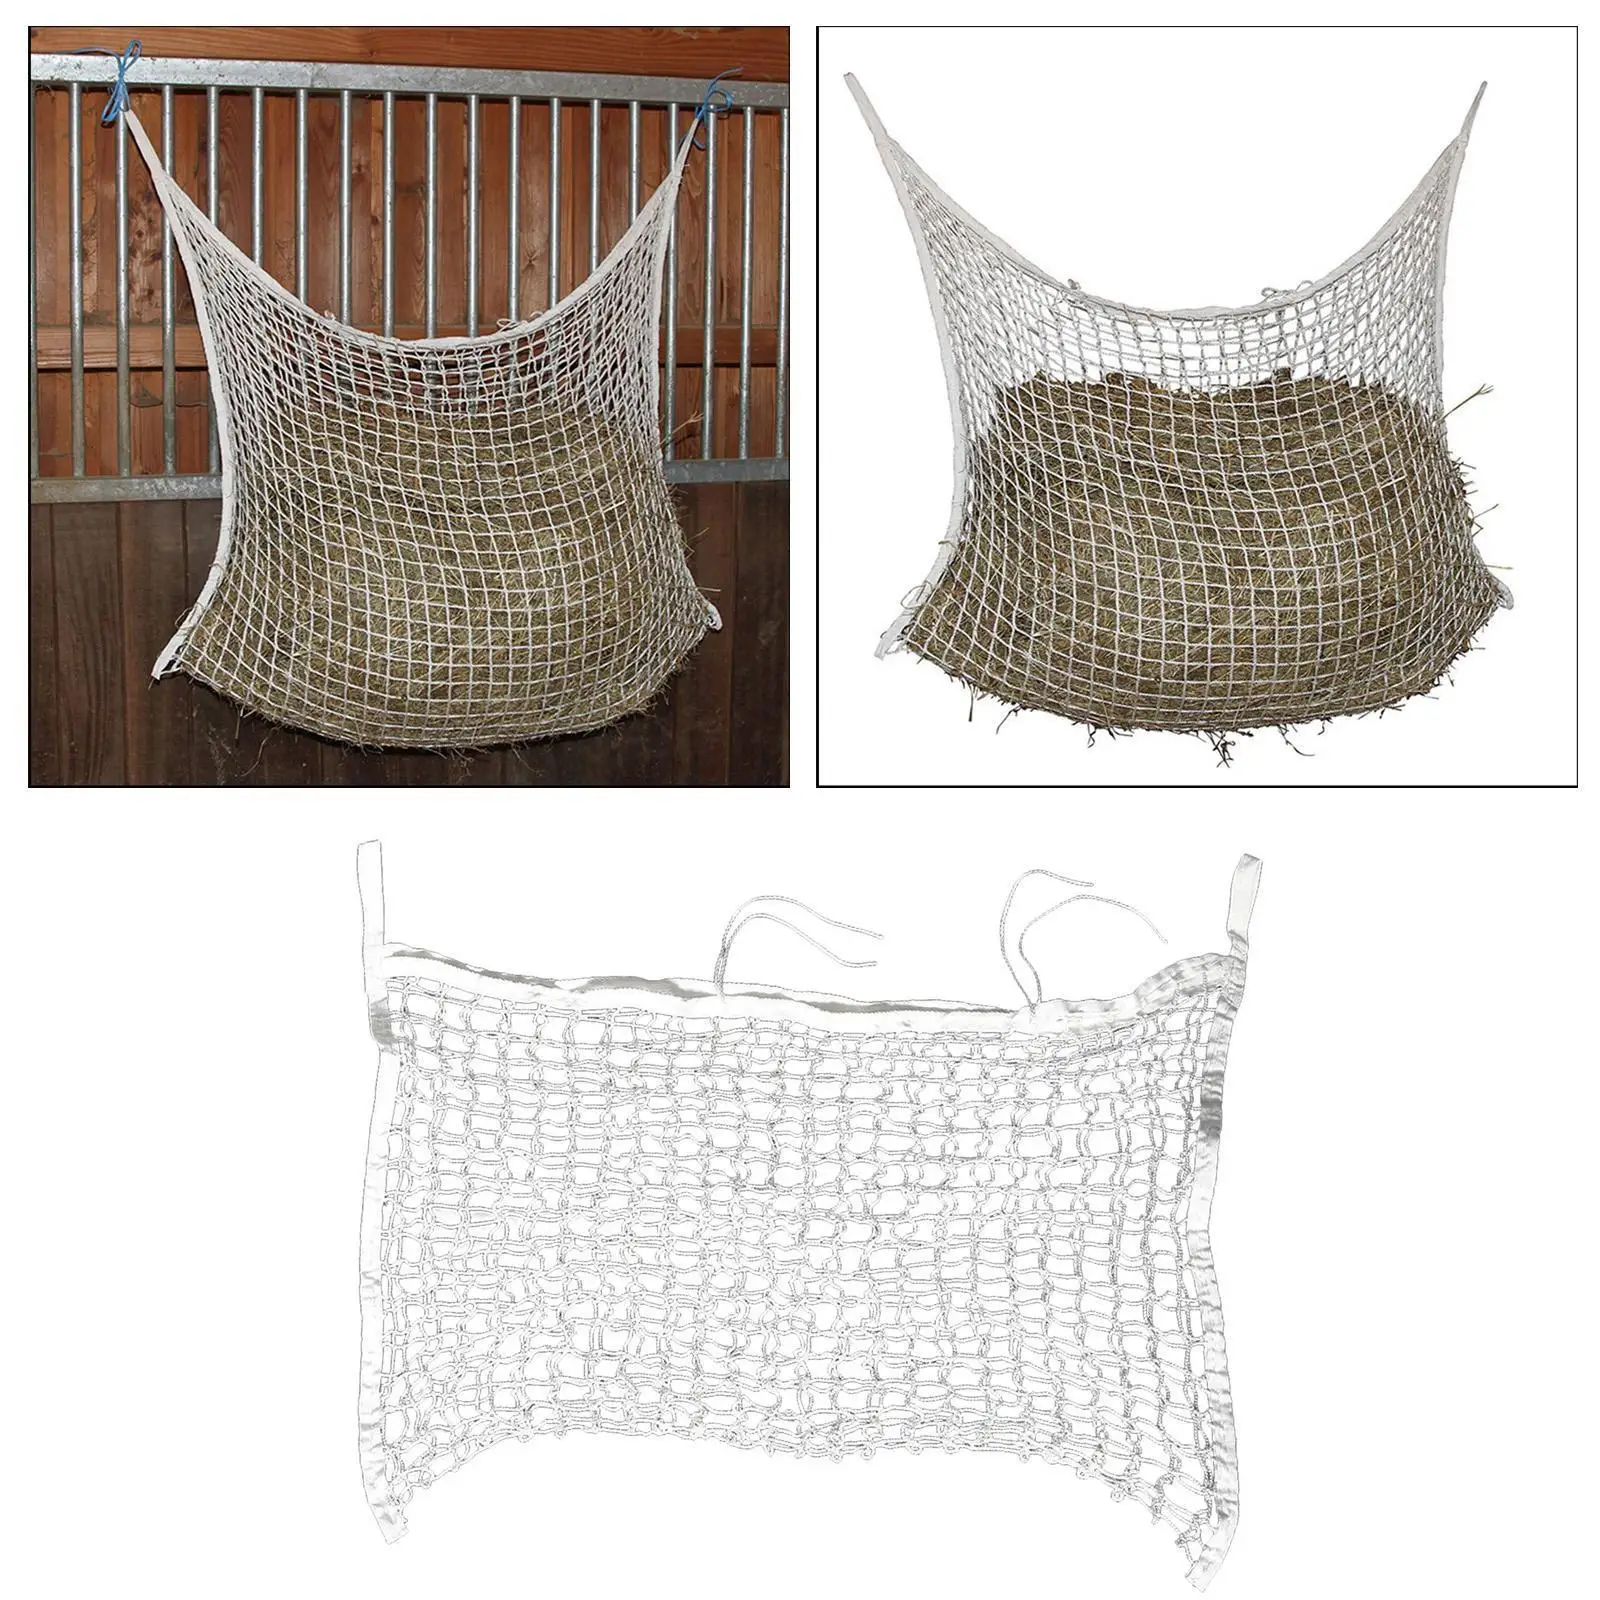 Full Day Horse Hay Net Bag Big Feeding Woven Straw Bag with Small Holes